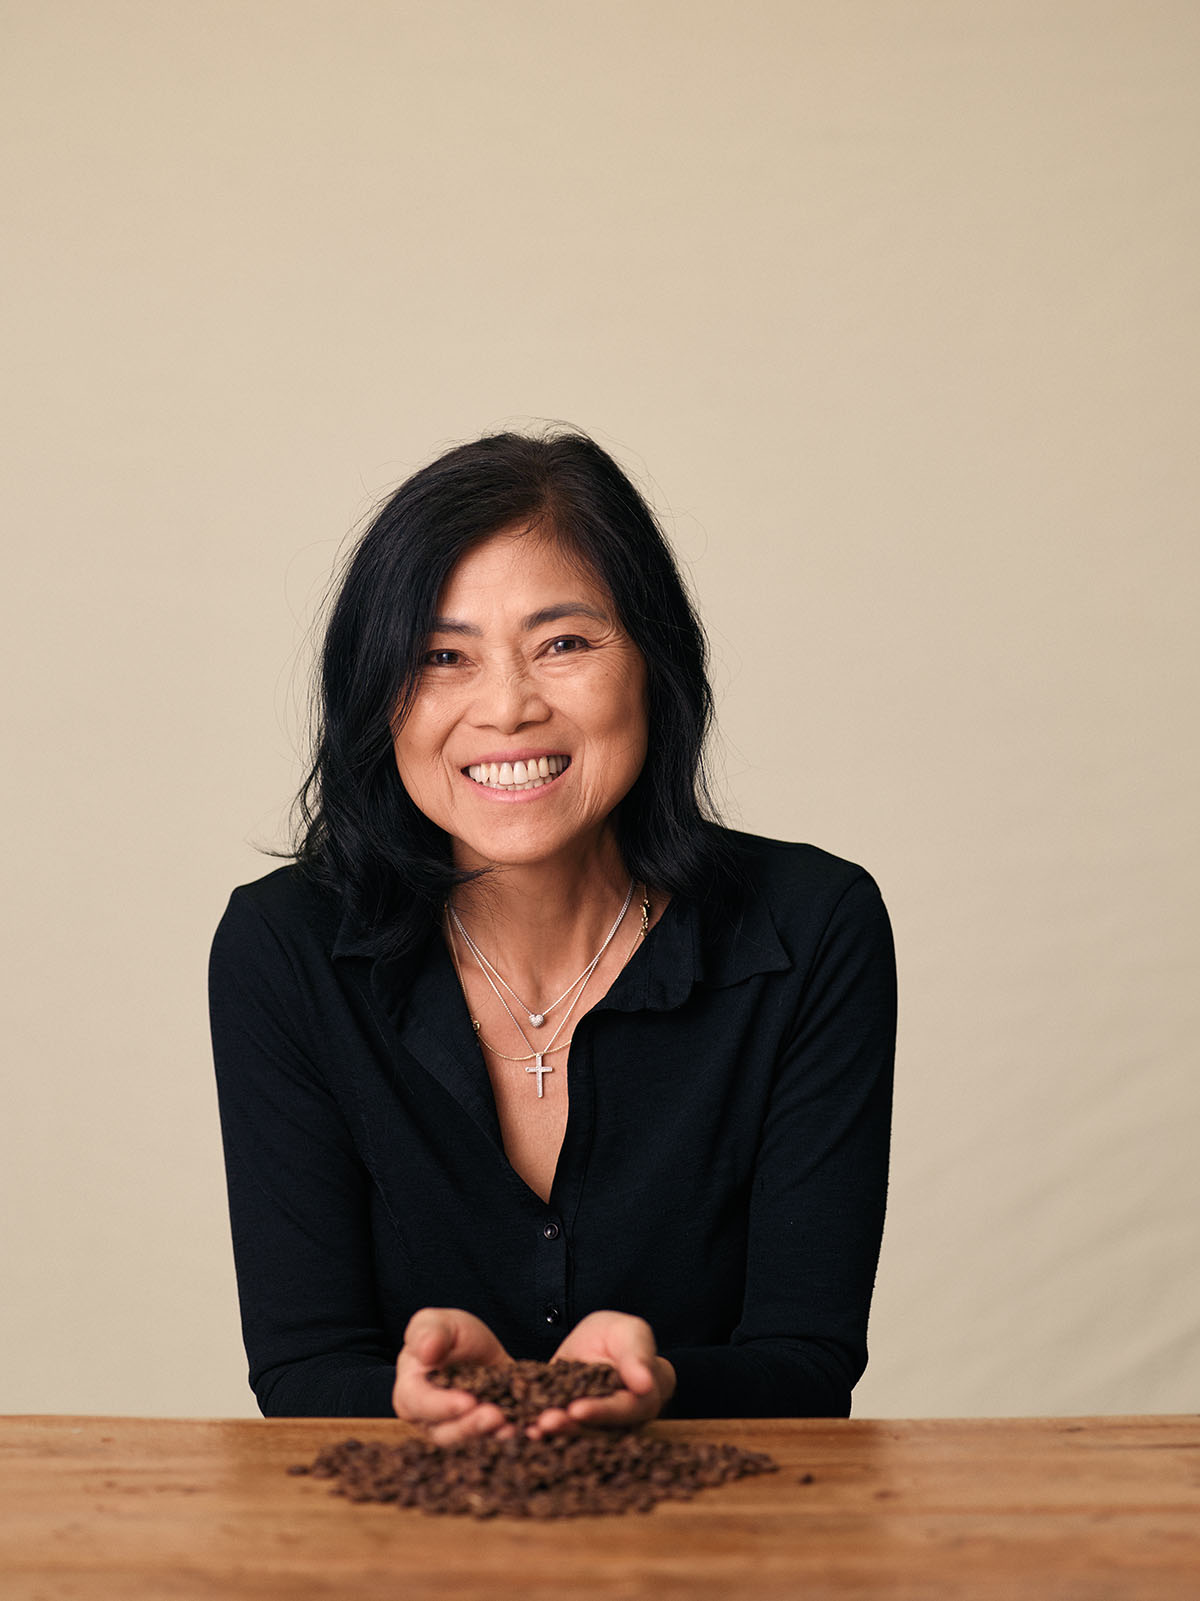 A woman in a black shirt with short black hair smiles in front of the camera